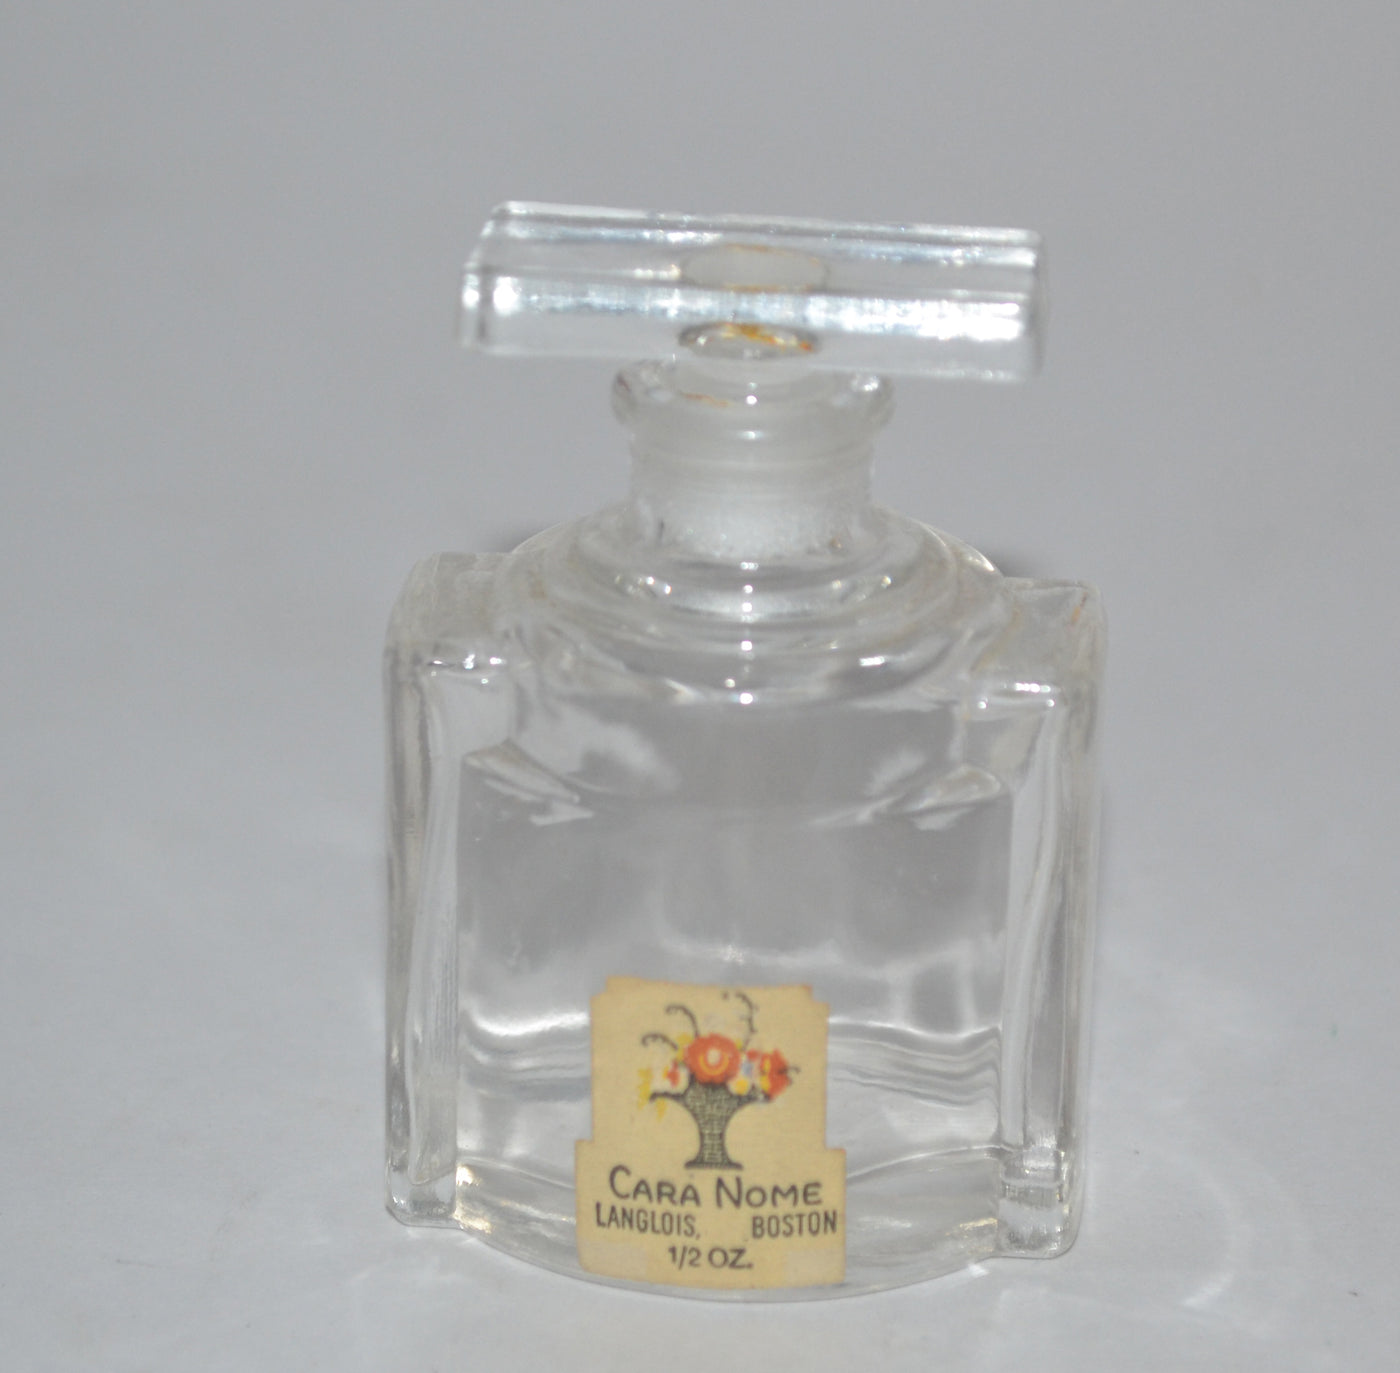 Vintage Langlois Perfume By Cara Nome